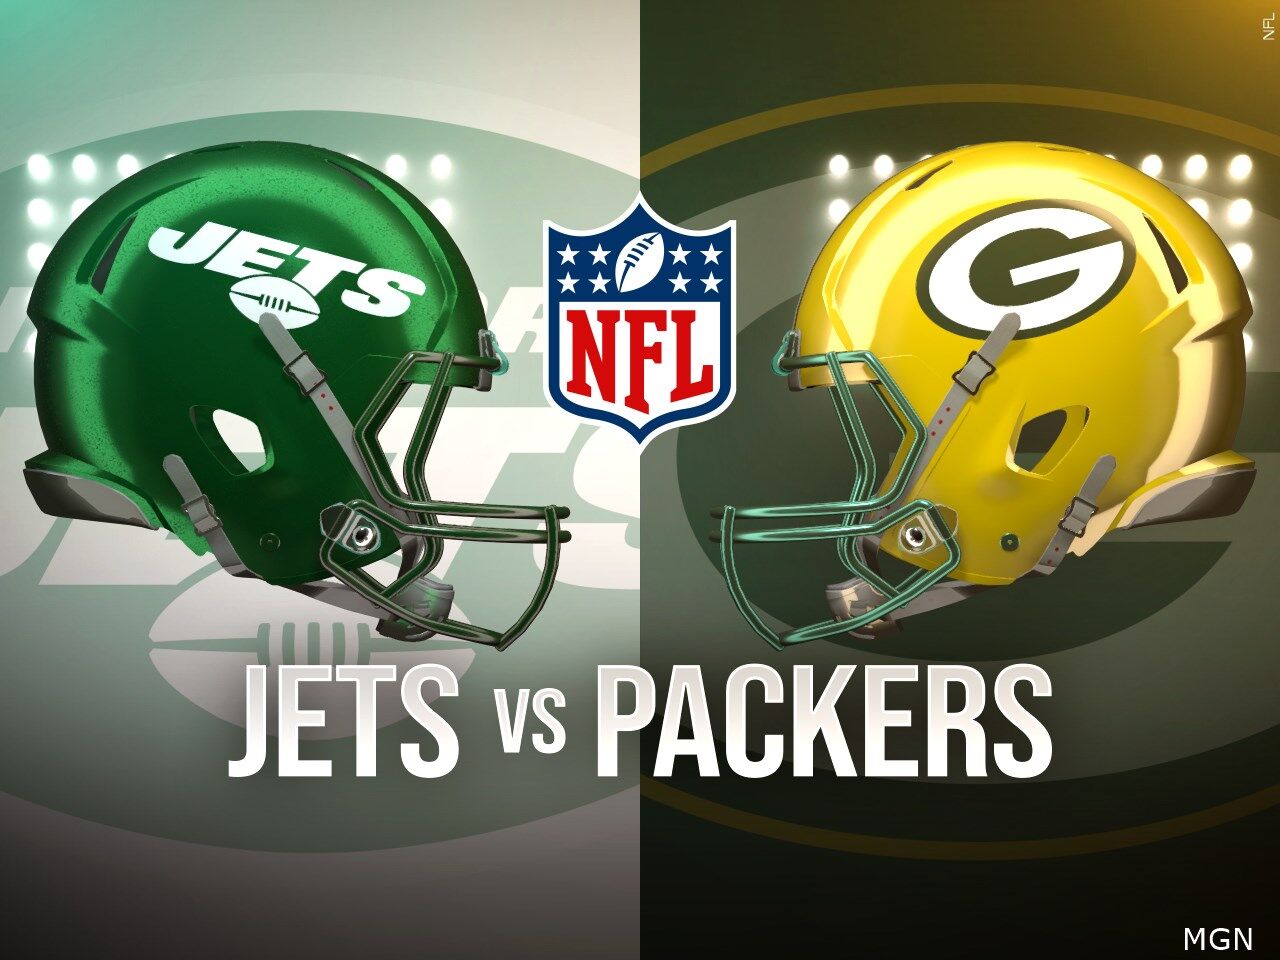 Jets stun the Packers 27-10 at Lambeau field as Packers drop to 3-3 on the  season, American Football